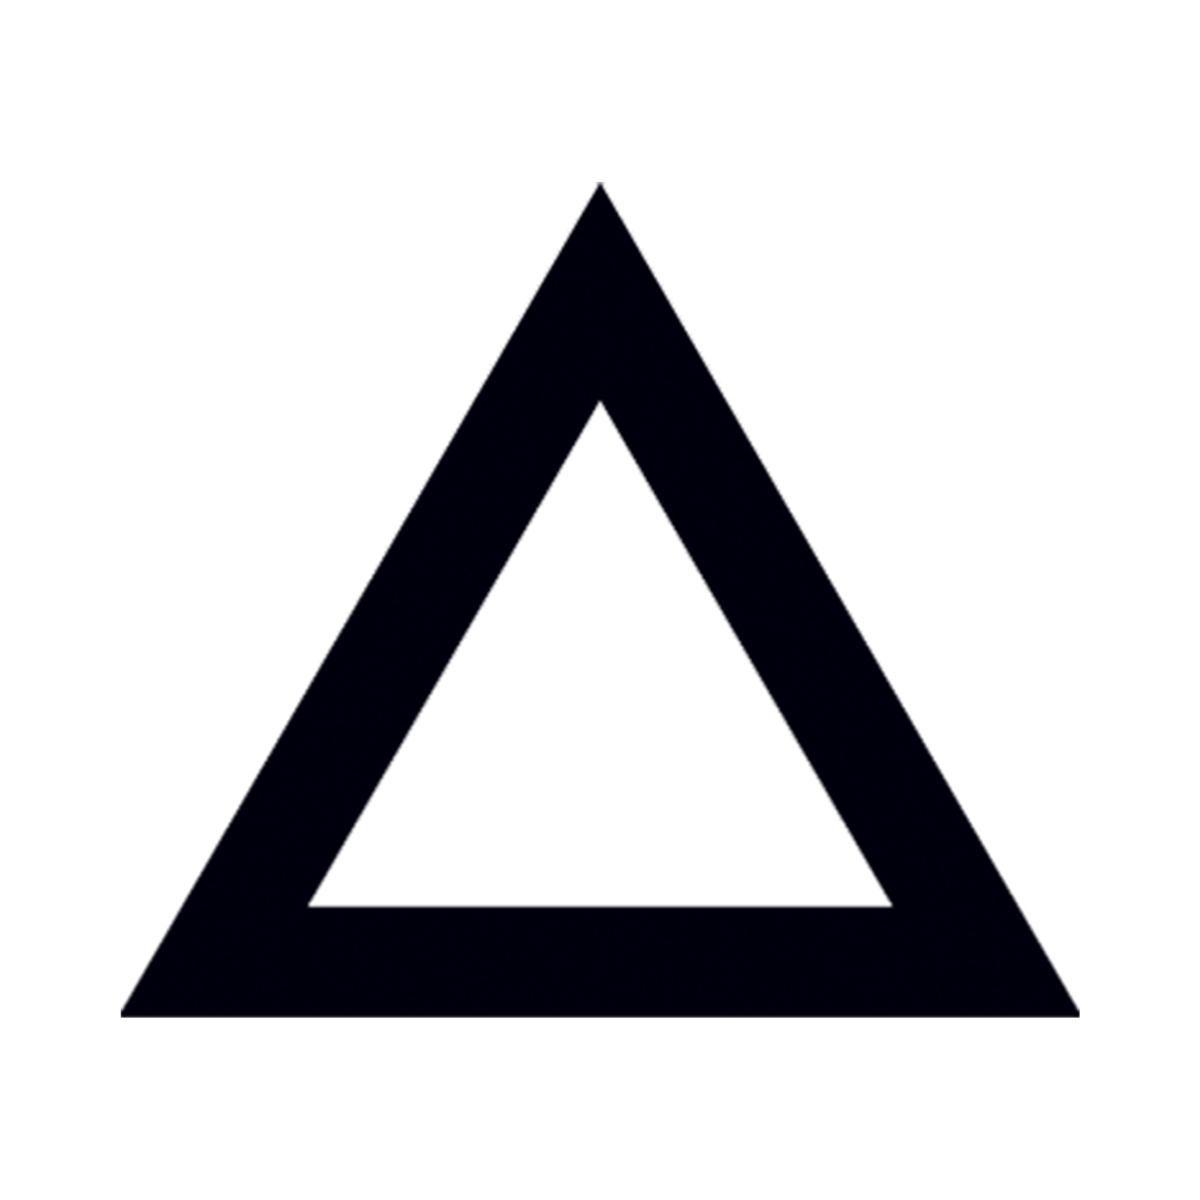 Whit Triangle Logo - Triangle by Team Tattly from Tattly Temporary Tattoos